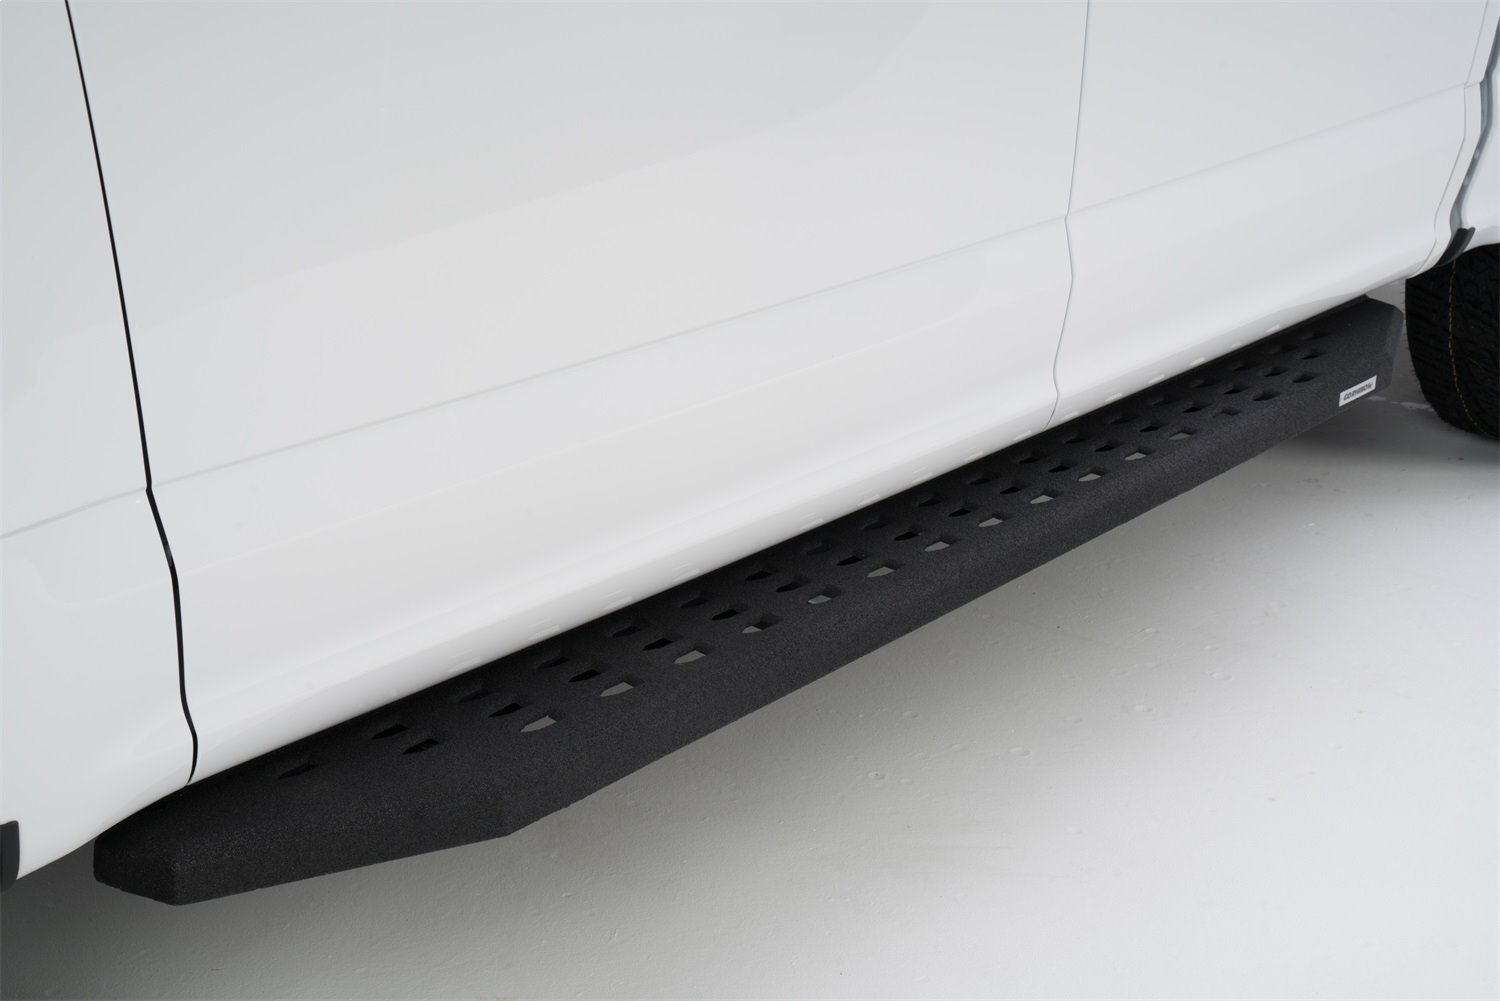 RB20 Running boards for 2004-2014 Ford F150 Super